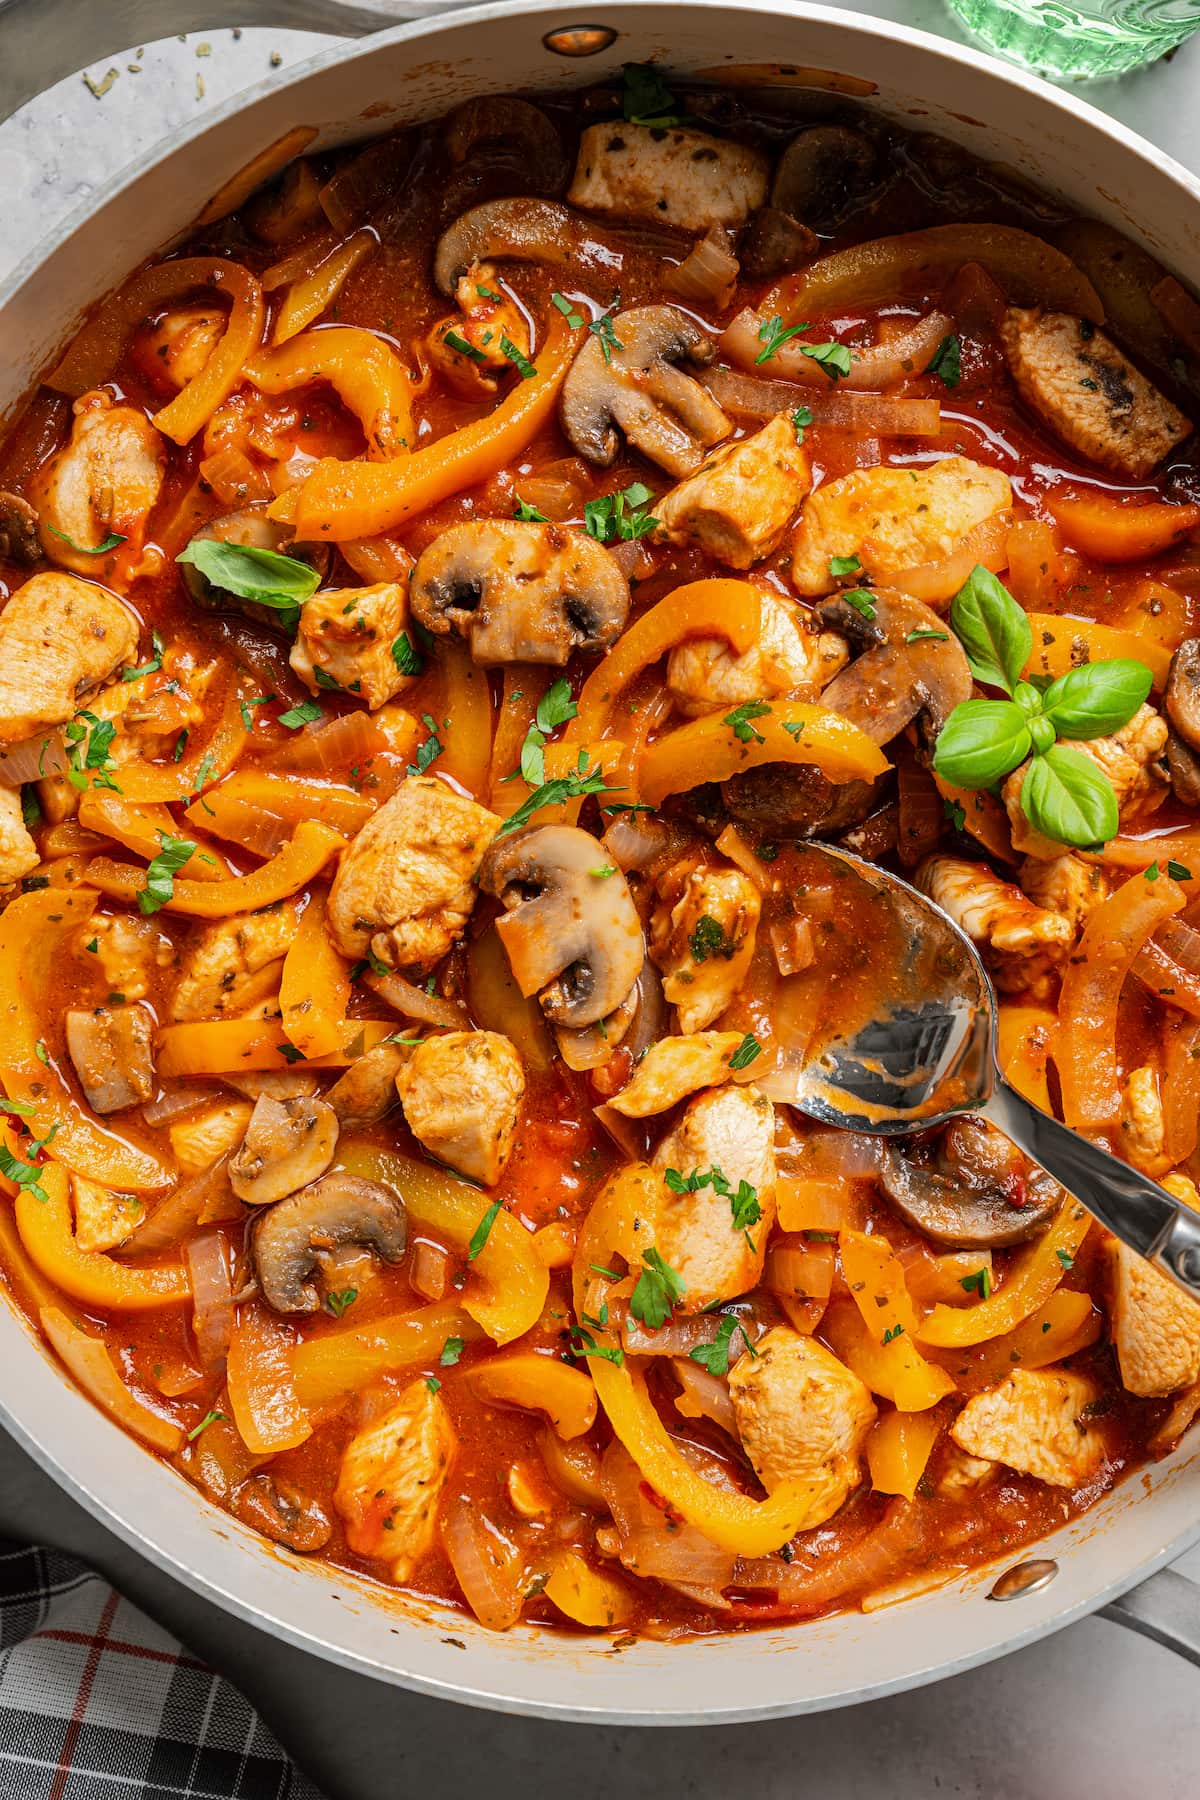 Saucy chicken with mushrooms, onions, and bell peppers in the pan.